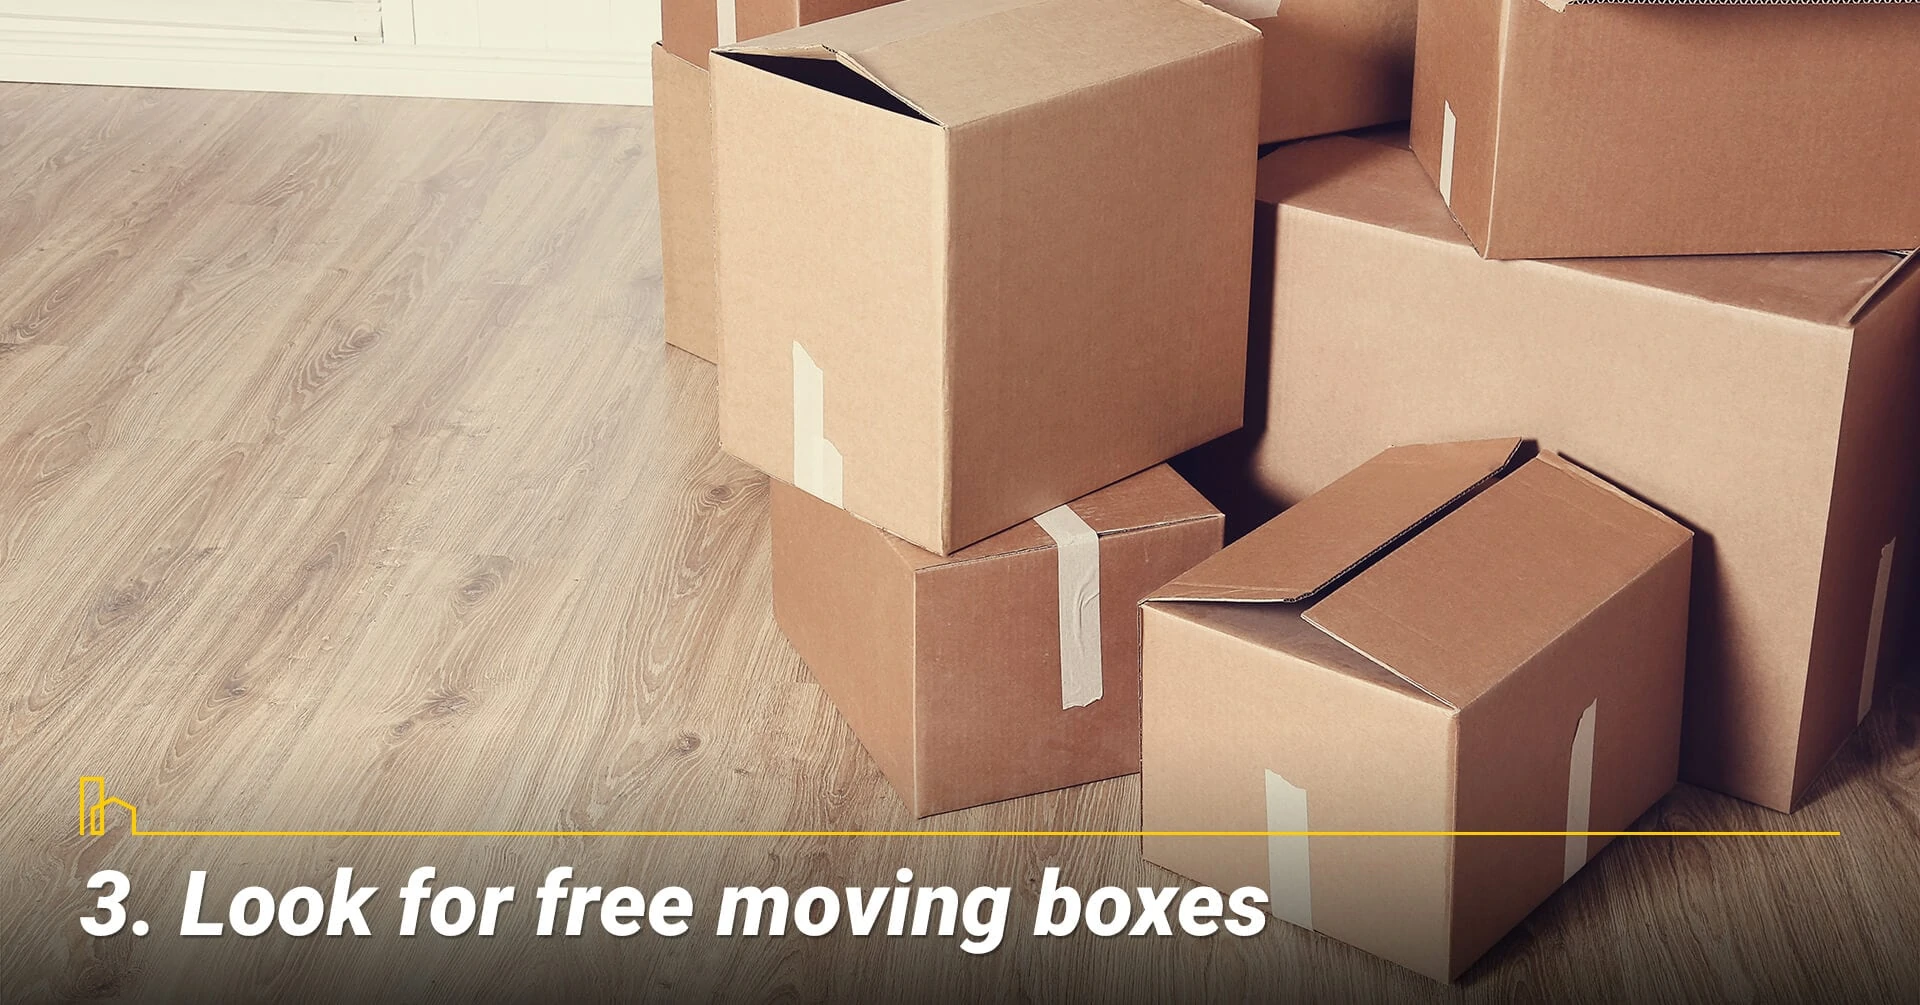 Look for free moving boxes, reuse moving boxes to reduce costs